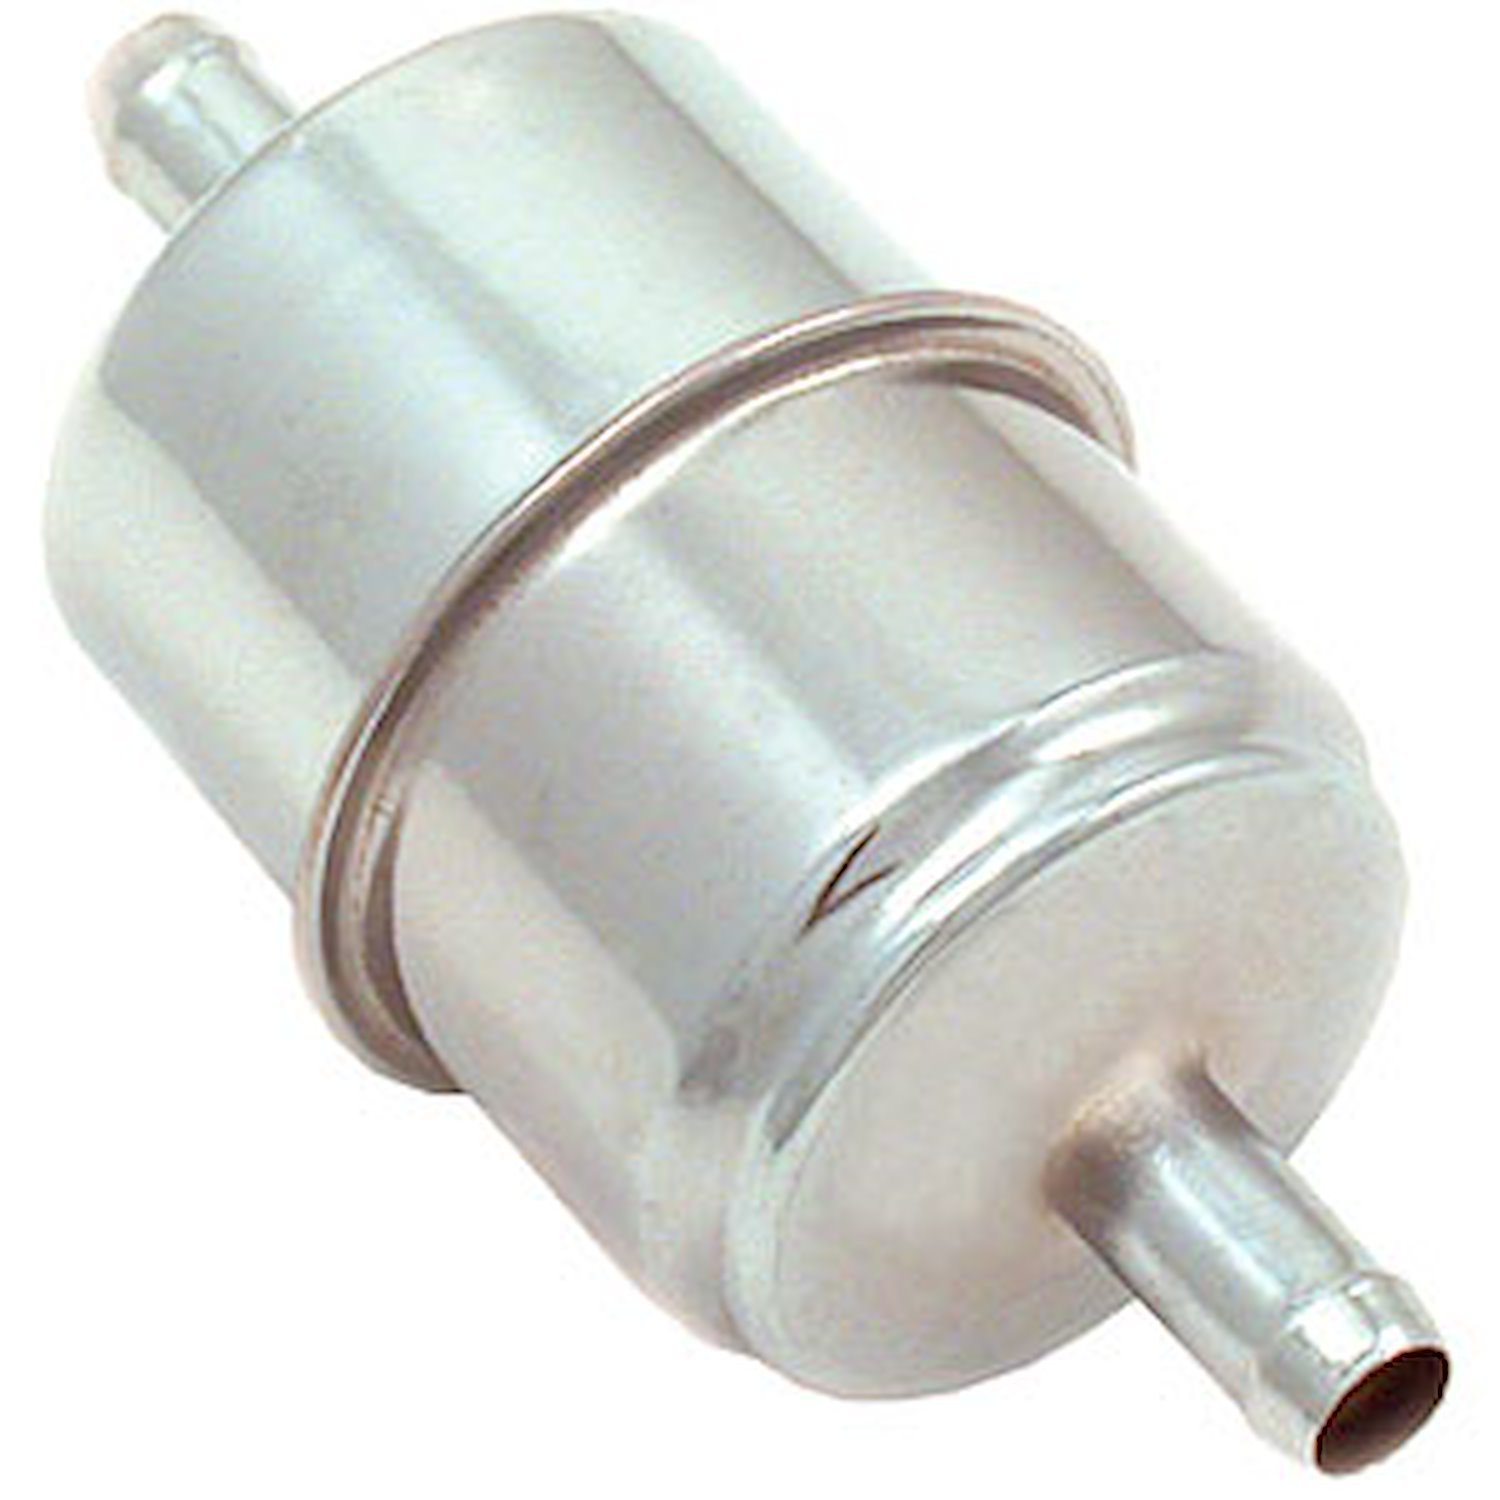 Inline Canister Fuel Filter For 3/8" & 5/16" Fuel Lines